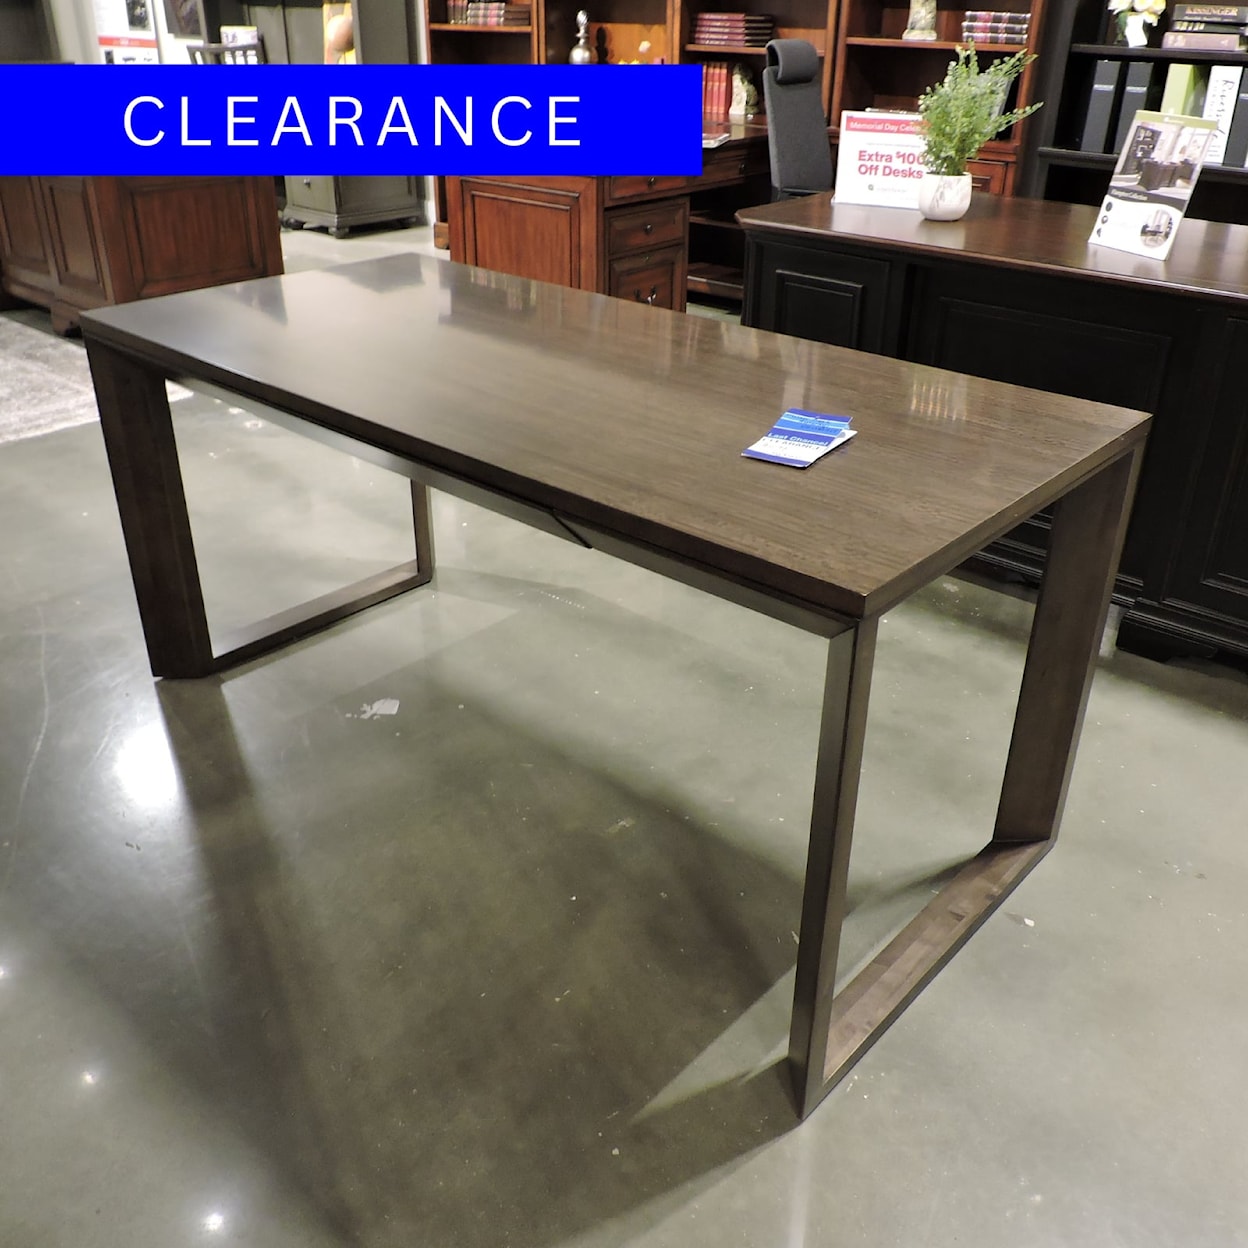 Miscellaneous Clearance Writing Desk